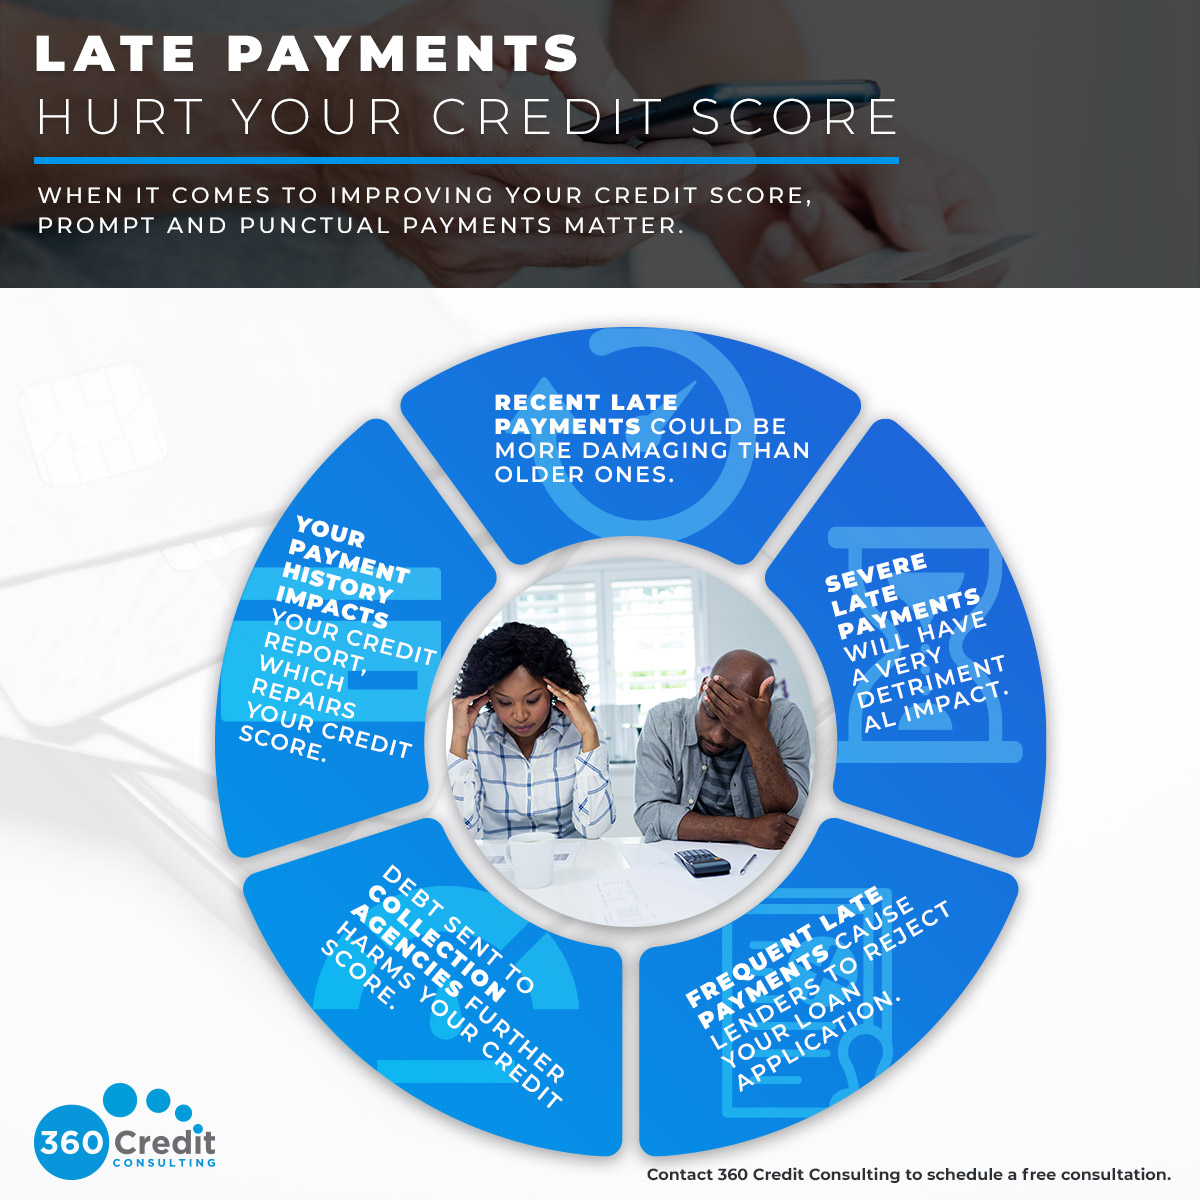 Credit score impact of recurring late payments